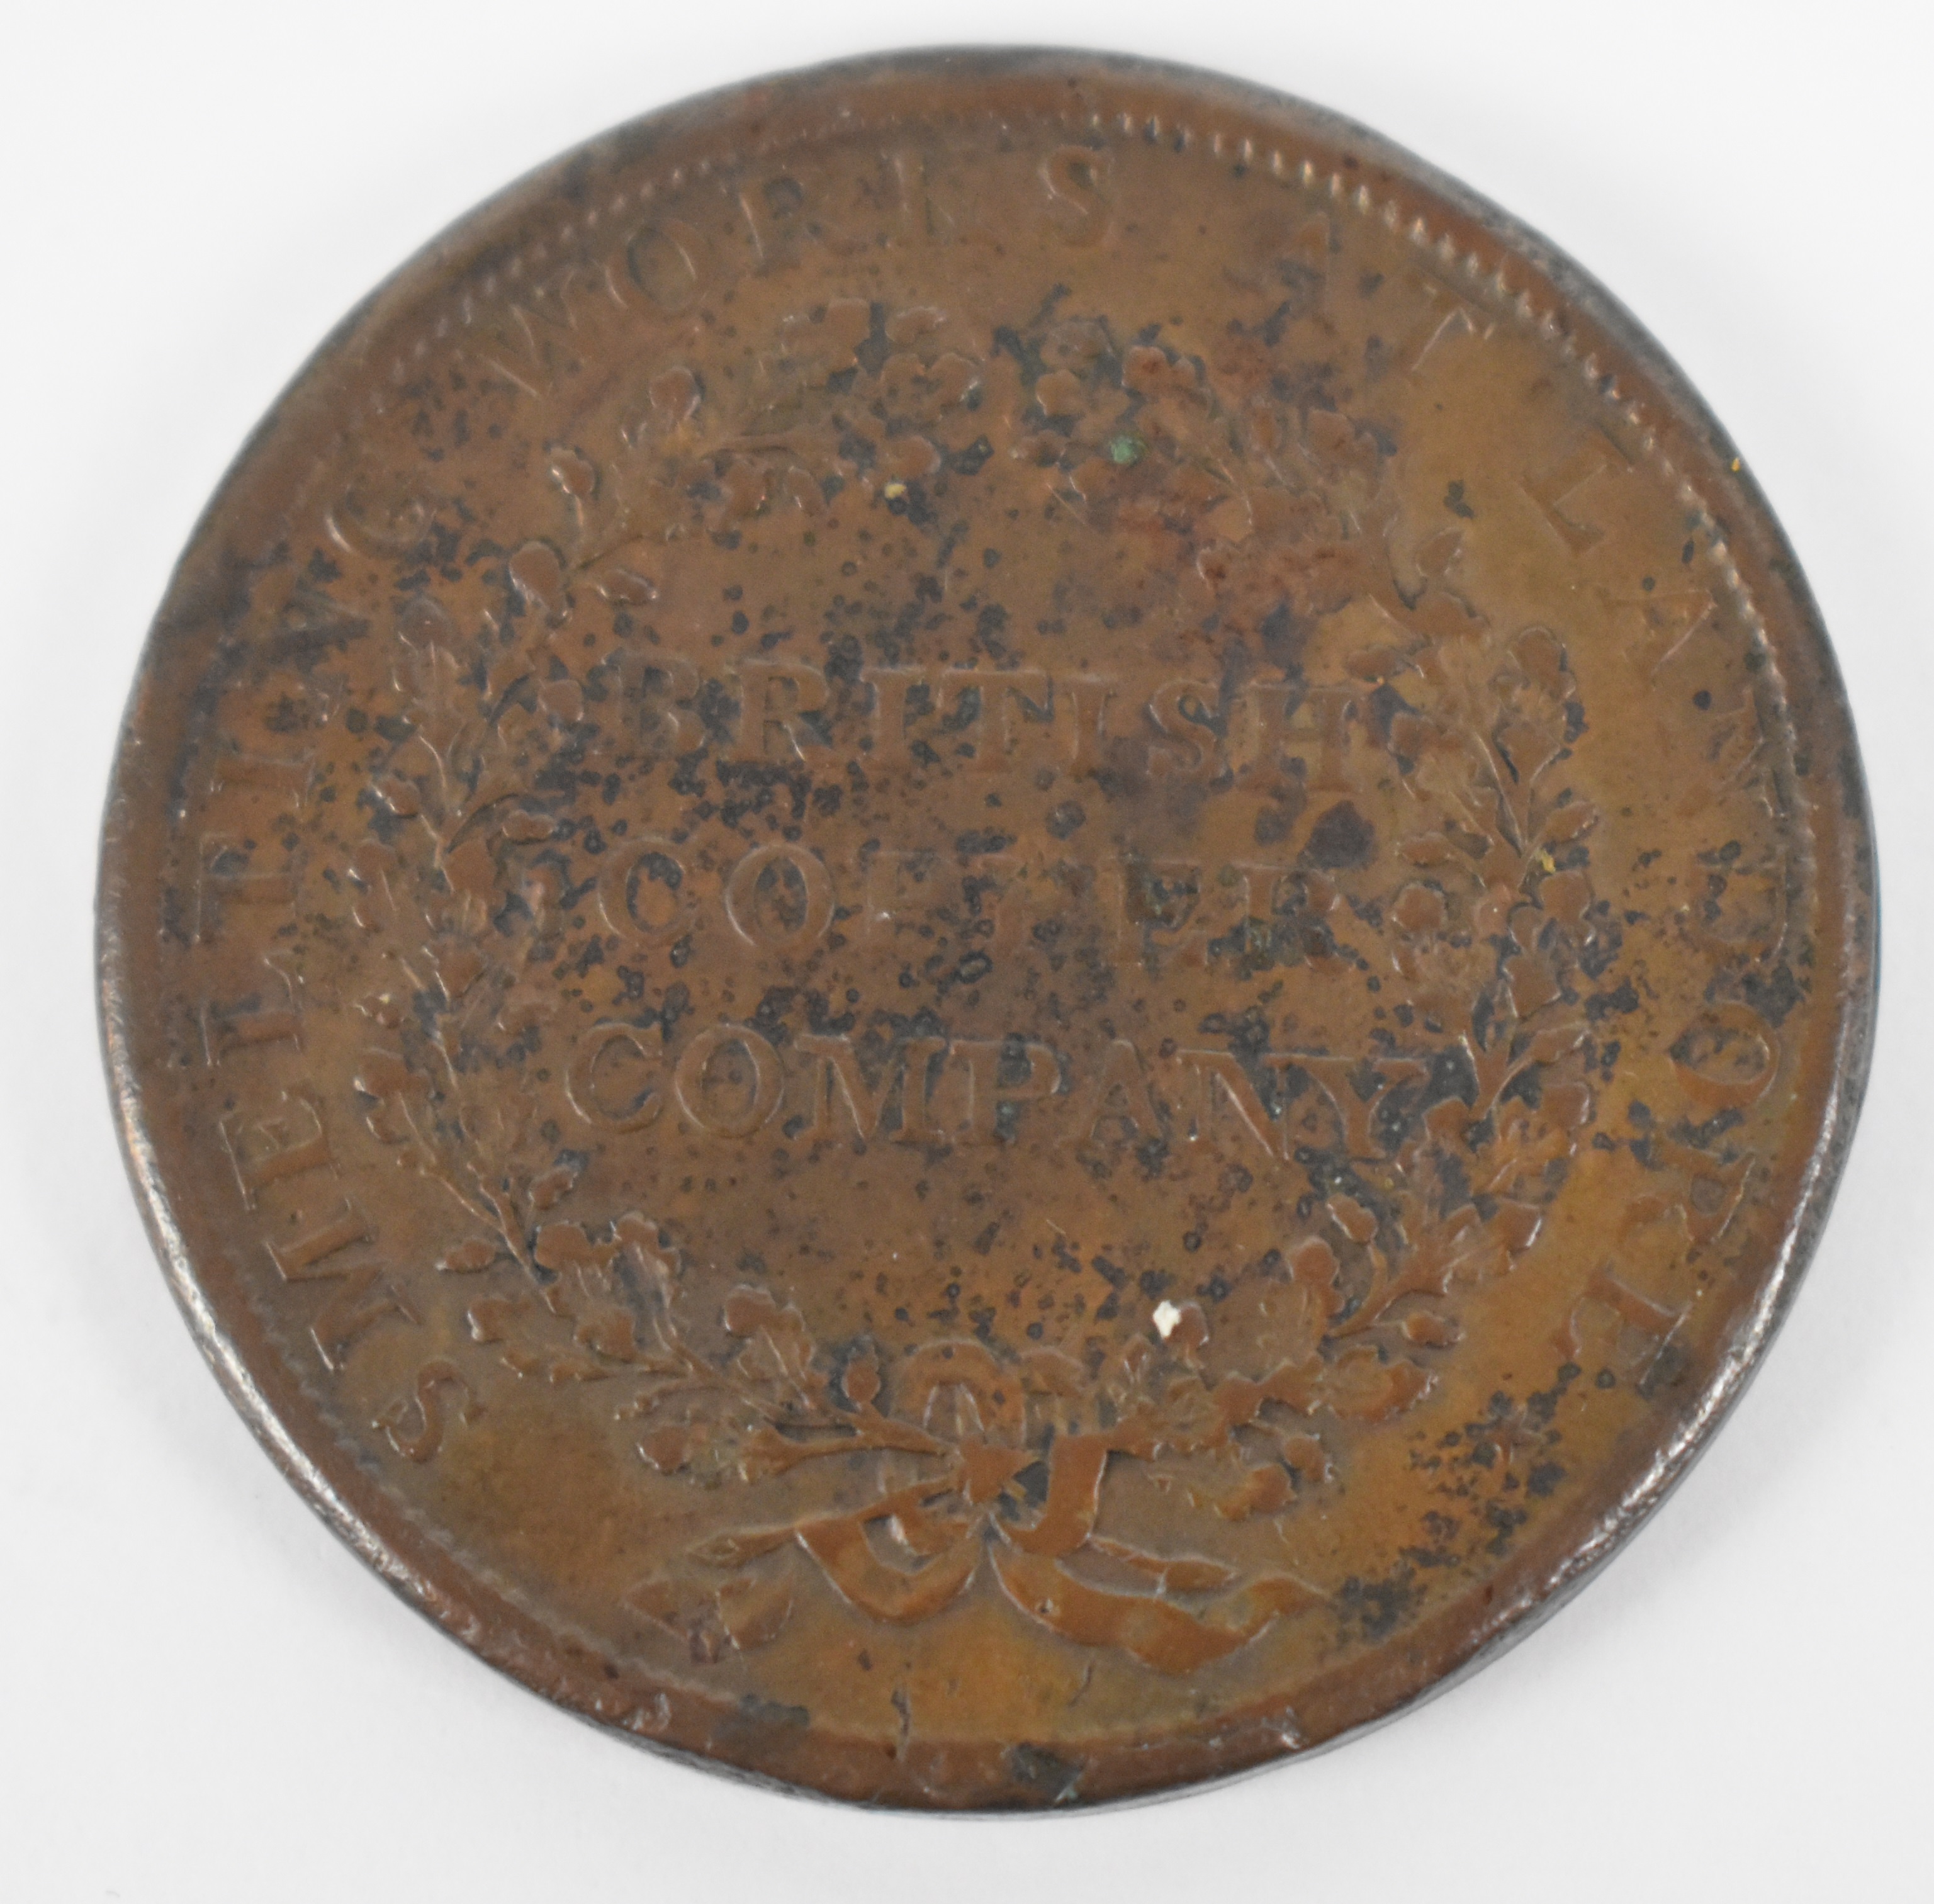 1812 Walthamstow British Copper Company Rolling Mills one penny token - Image 4 of 4